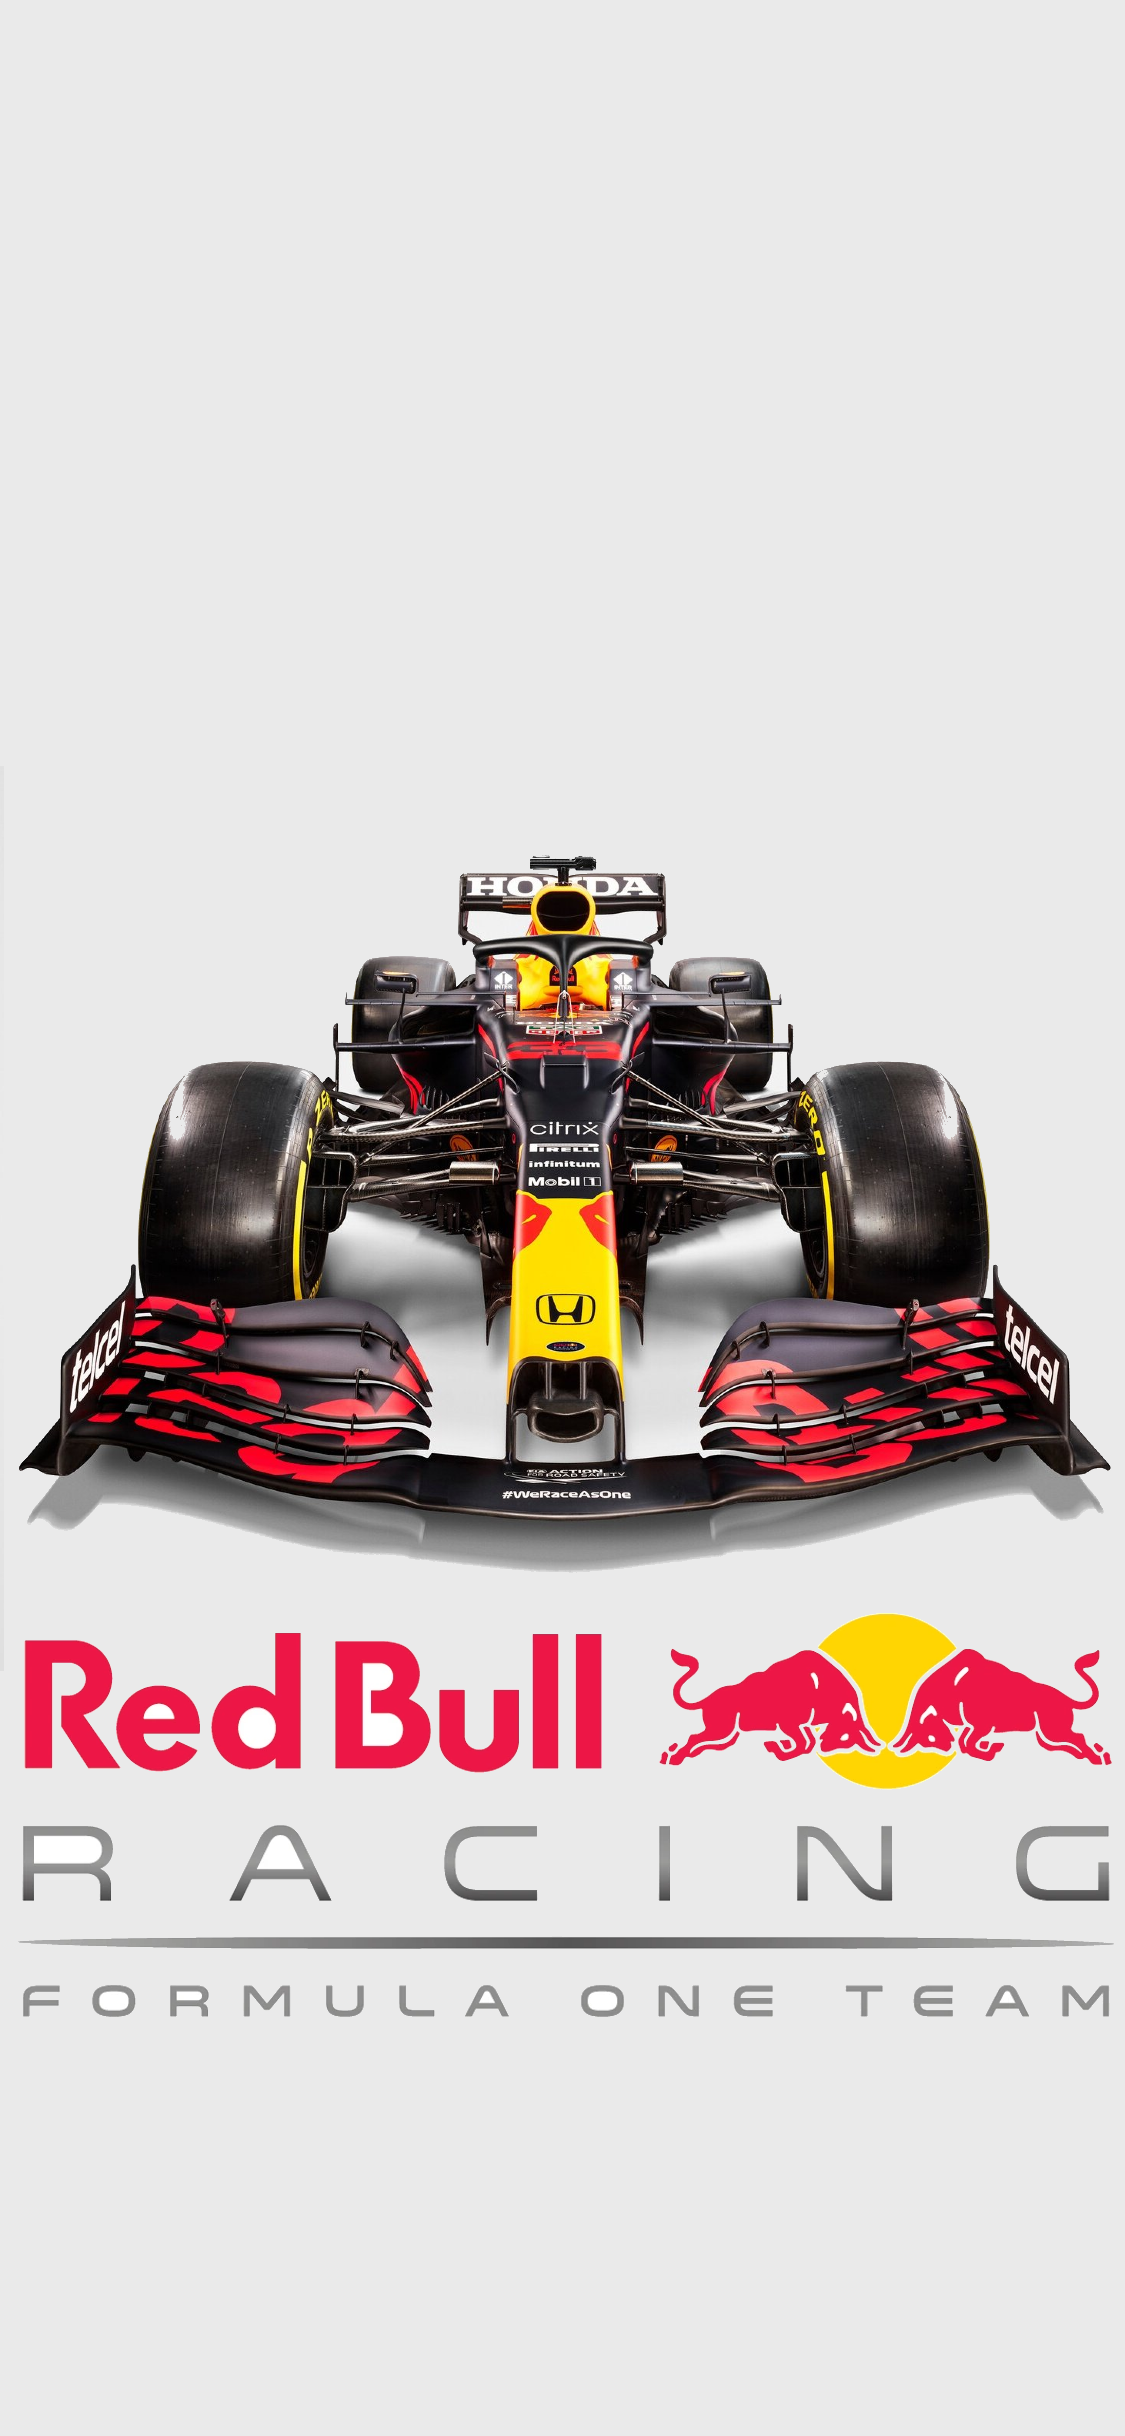 A very clean 2021 Red Bull Racing wallpaper